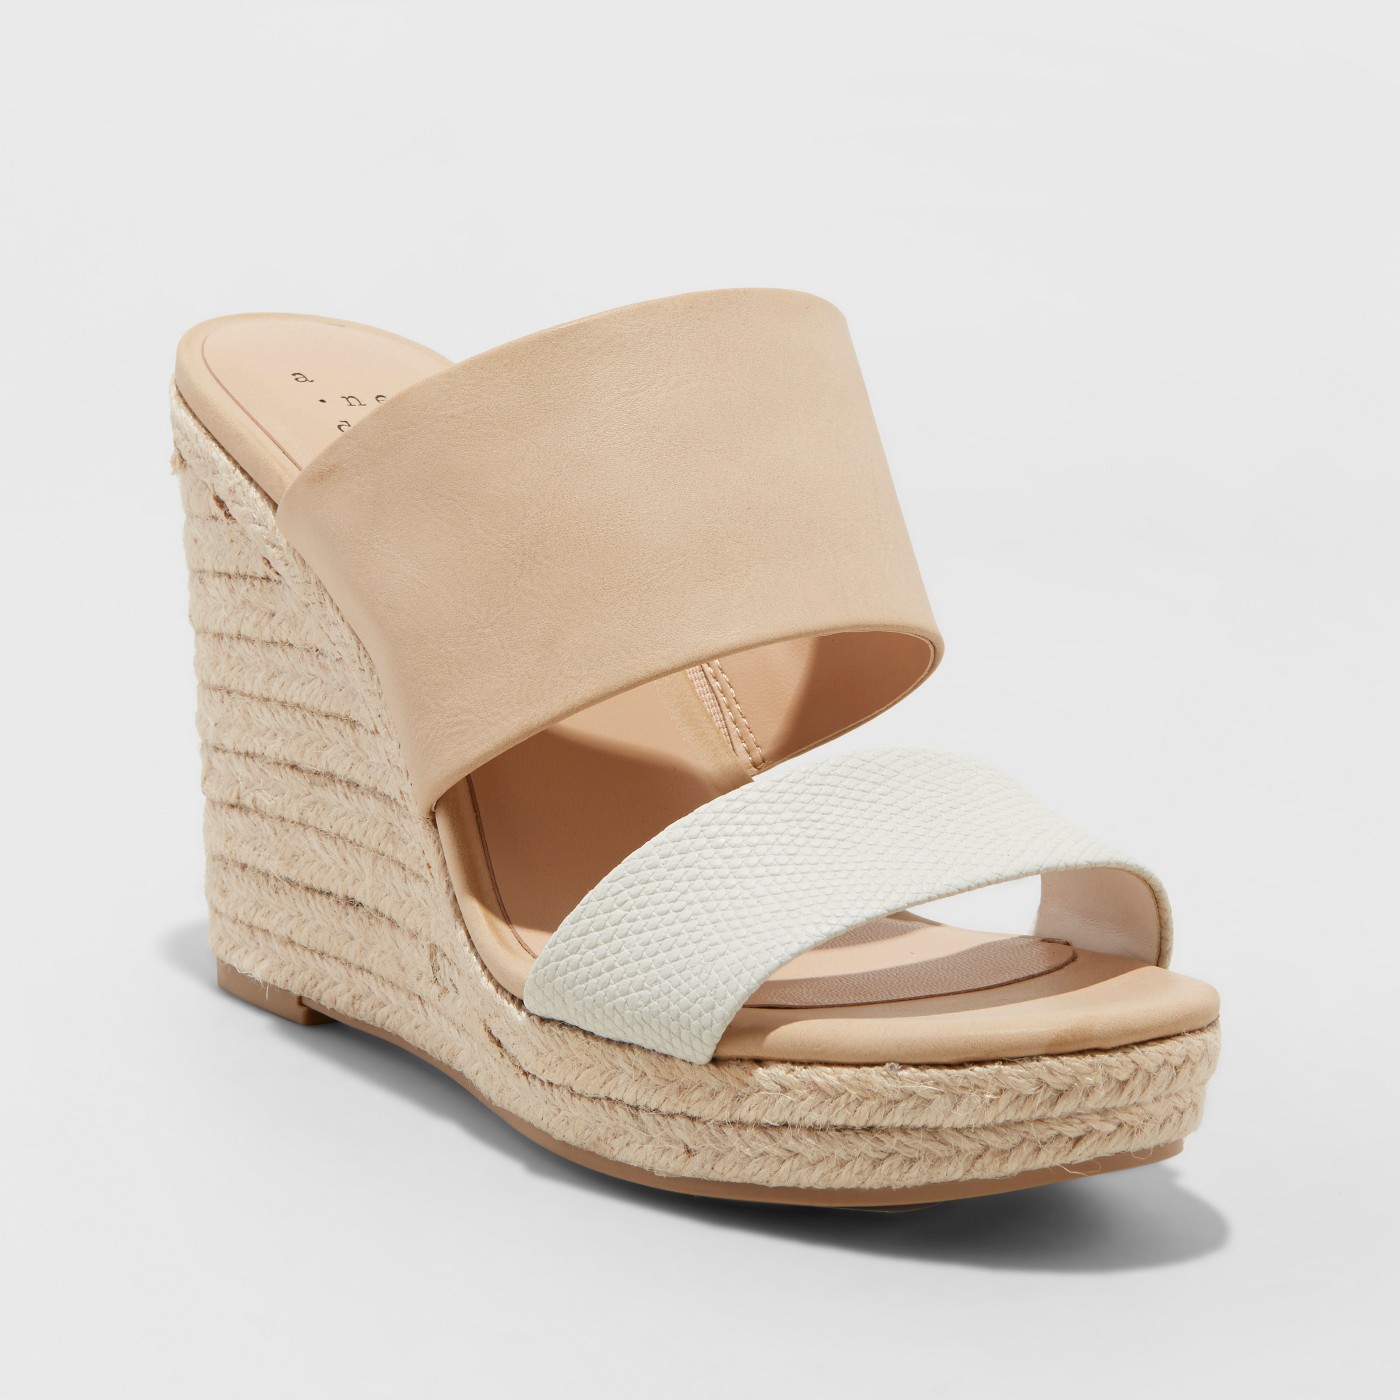 Target Shoes Under $35 — Chic Panda Mom